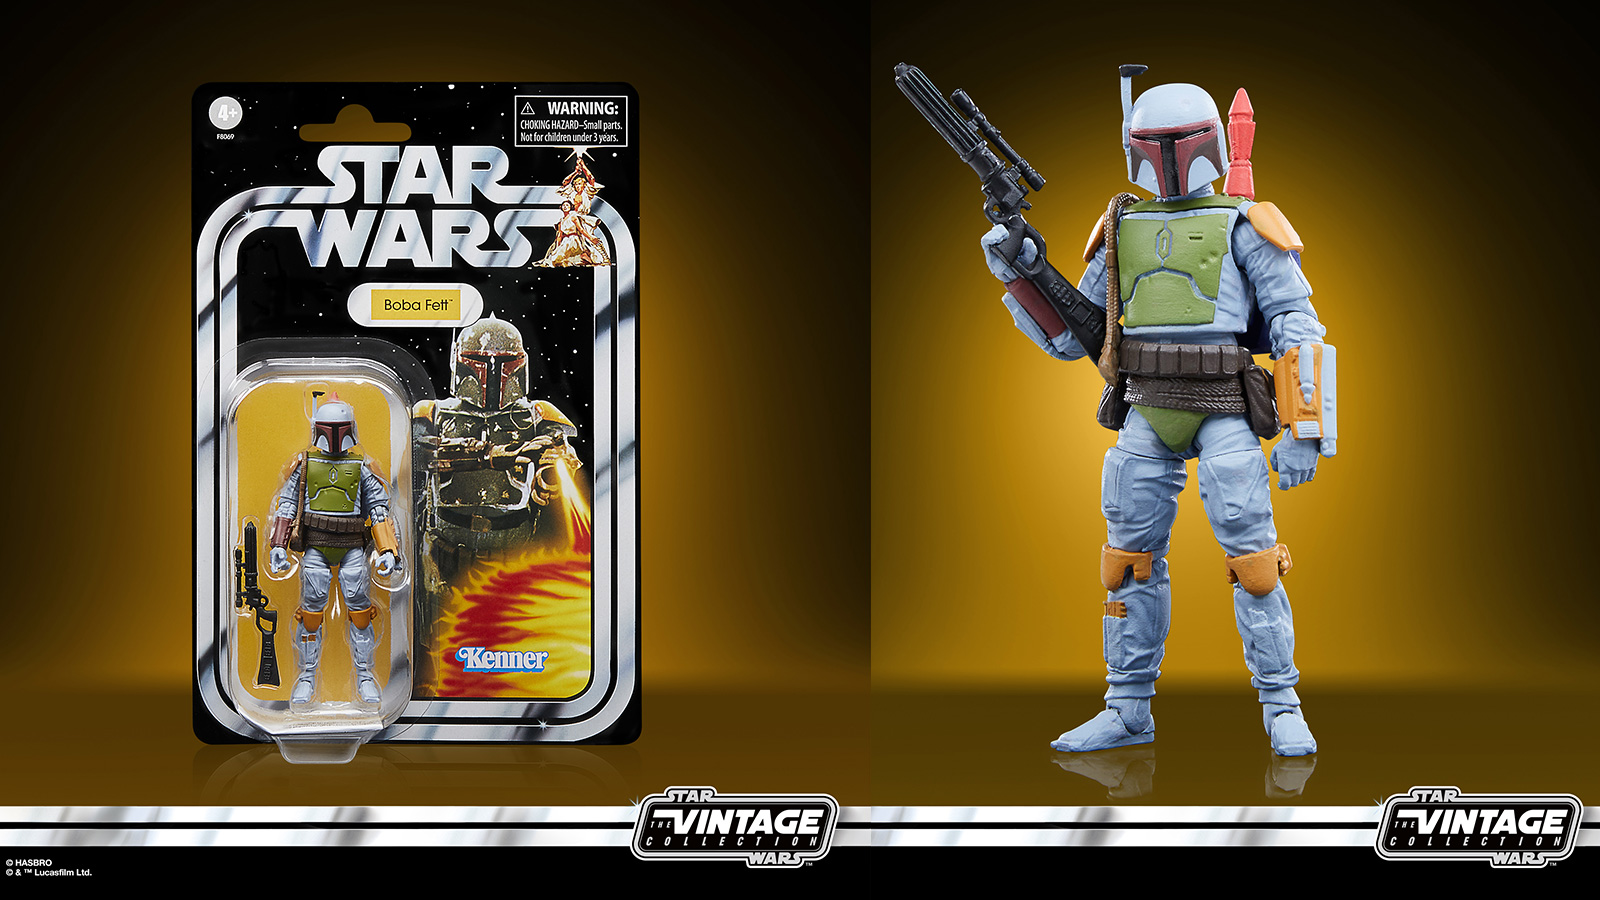 Update On Preorder For Target Exclusive TVC 3.75-Inch Boba Fett - 11/16 at 1PM ET